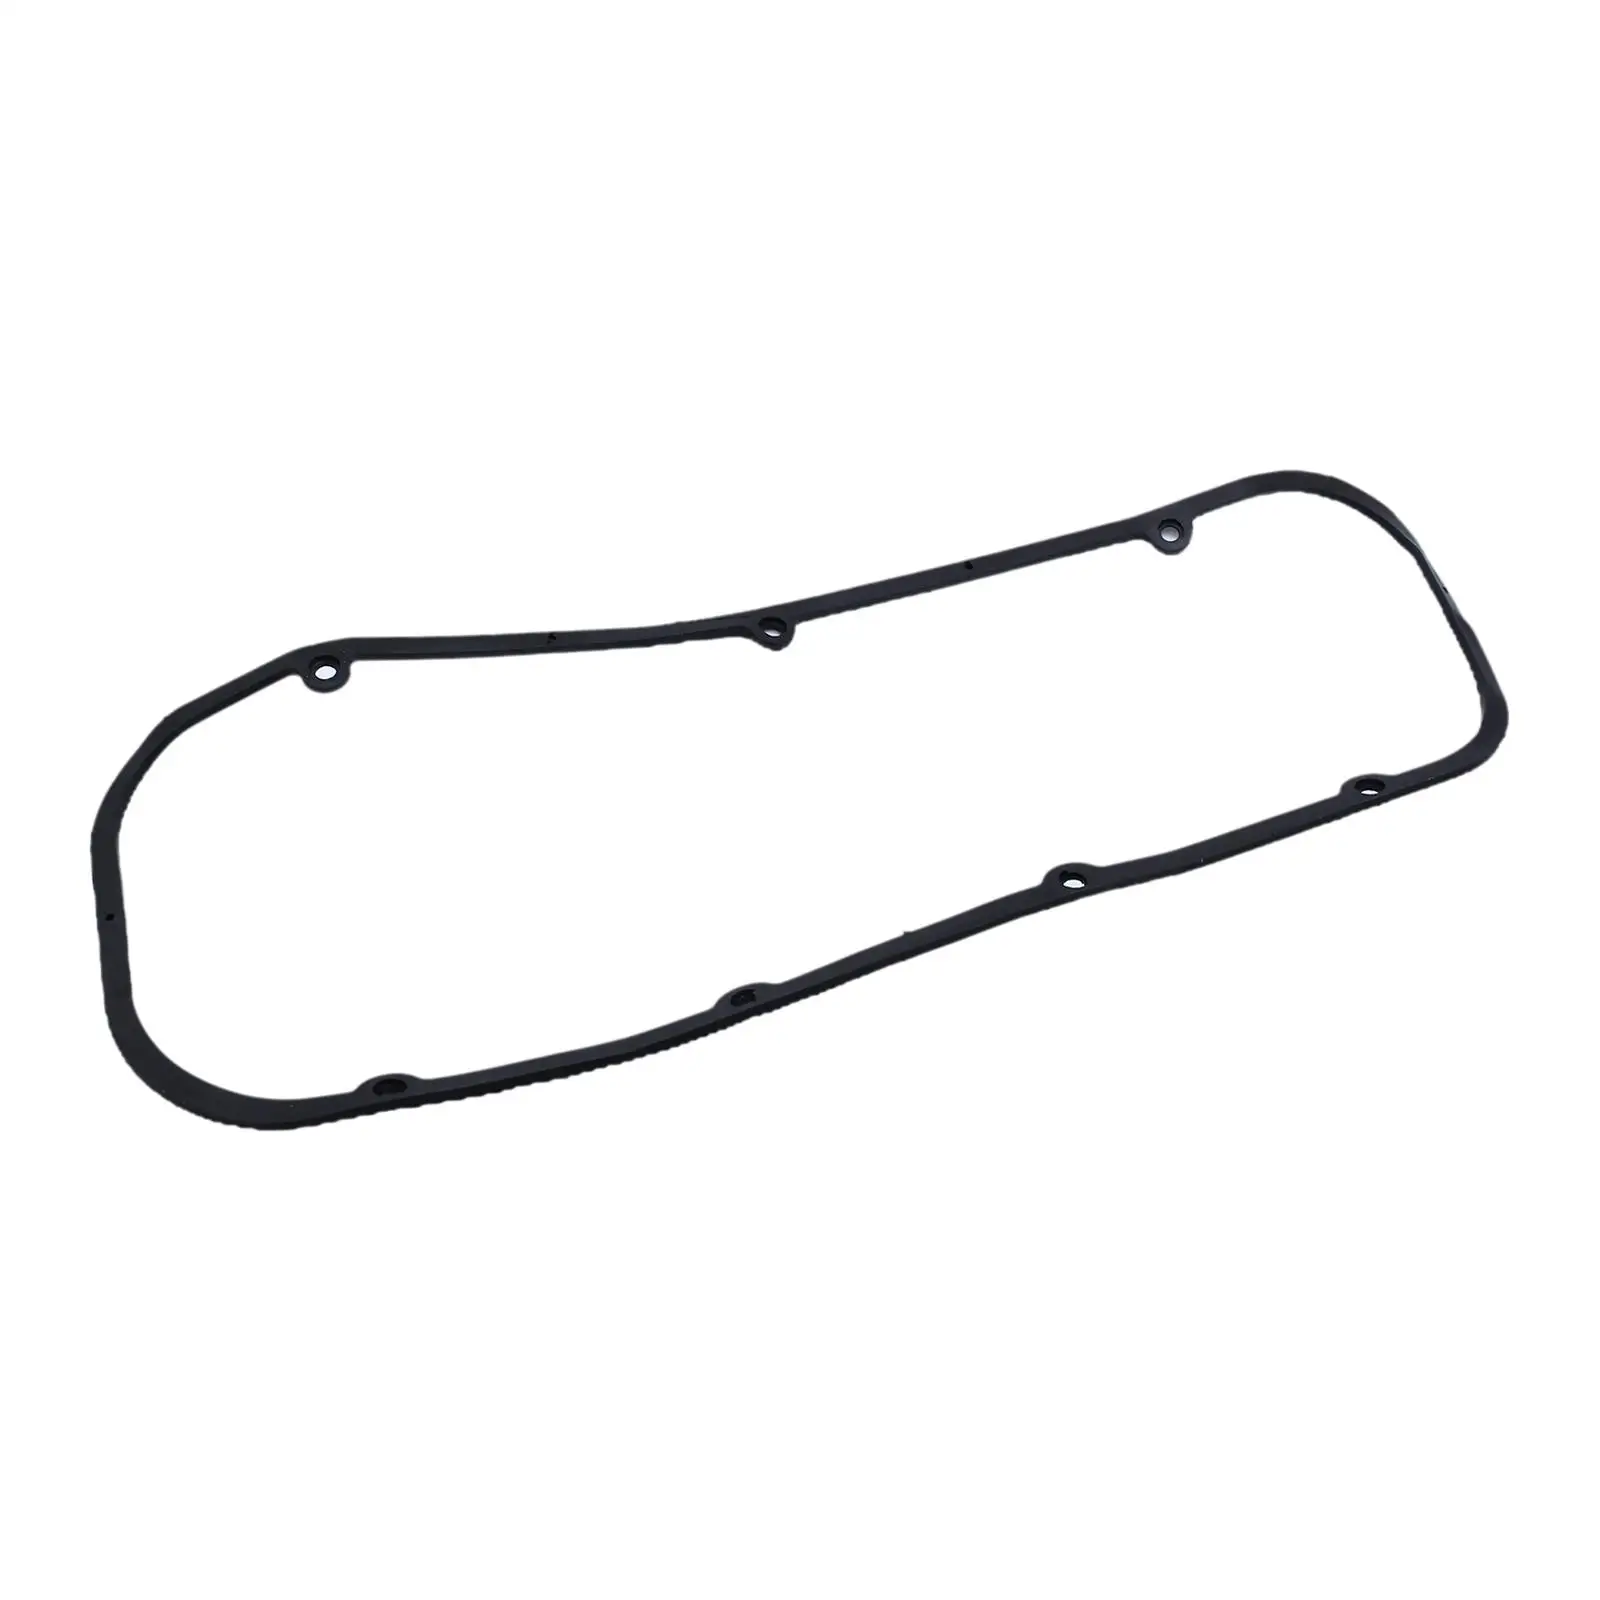 Steel Core Valve Cover Gaskets Gaskets Seals for Chevy BB 396 427 454